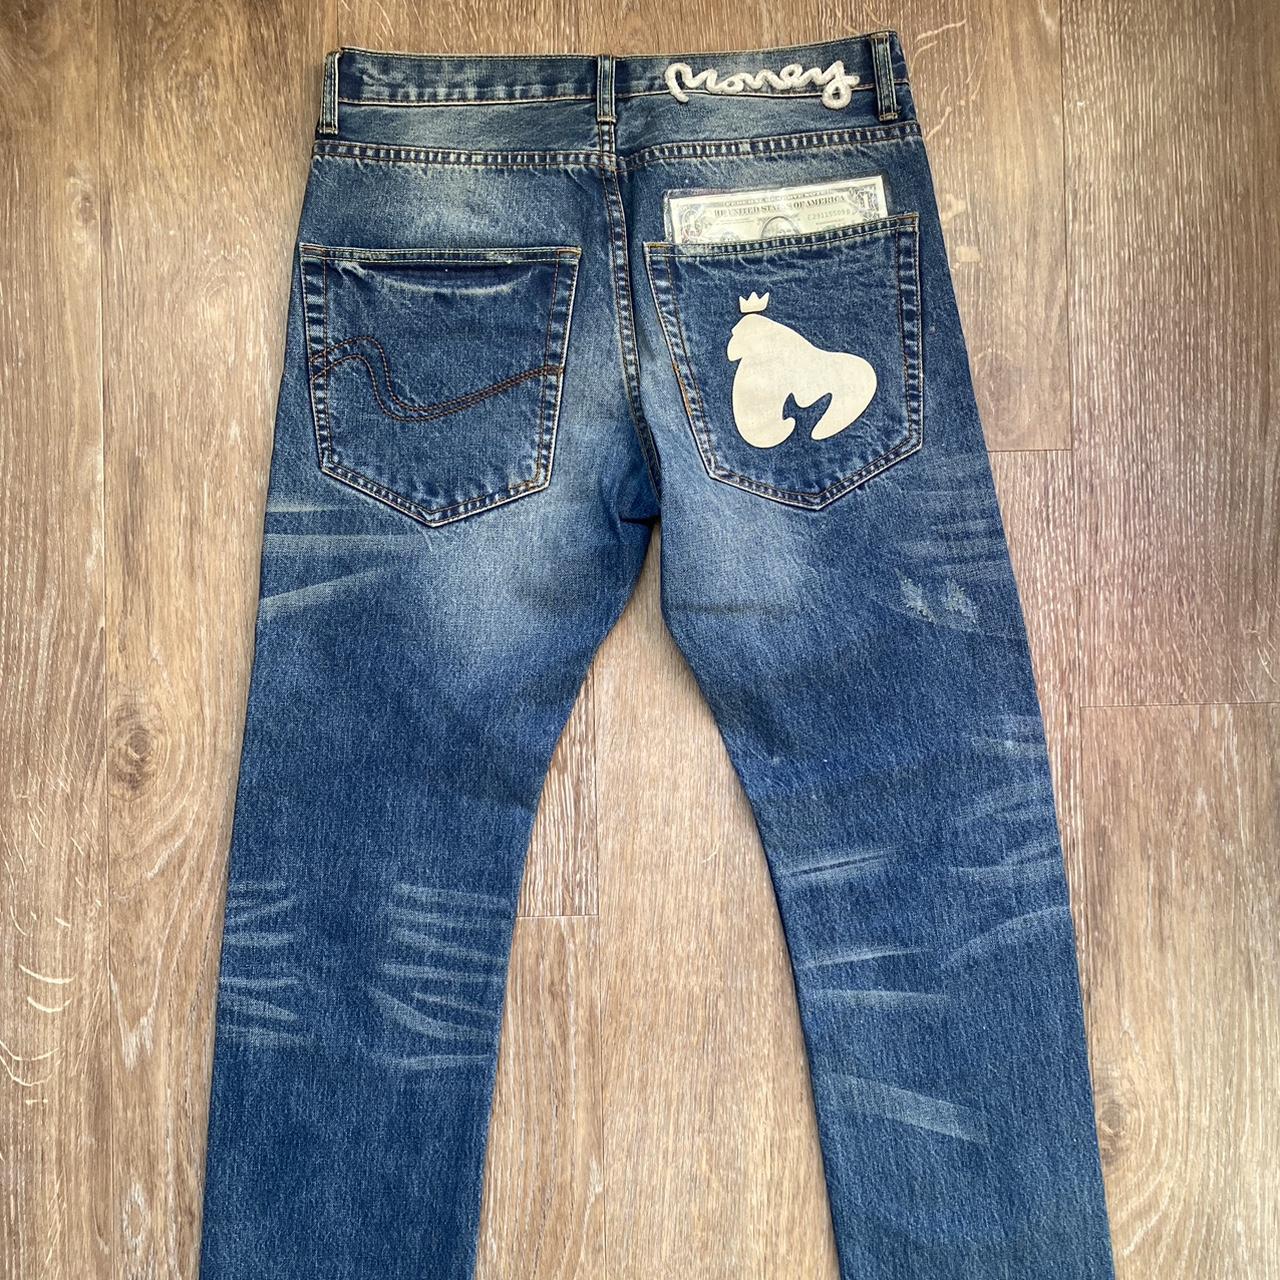 Money Talks navy blue jeans with back Apa print and... - Depop